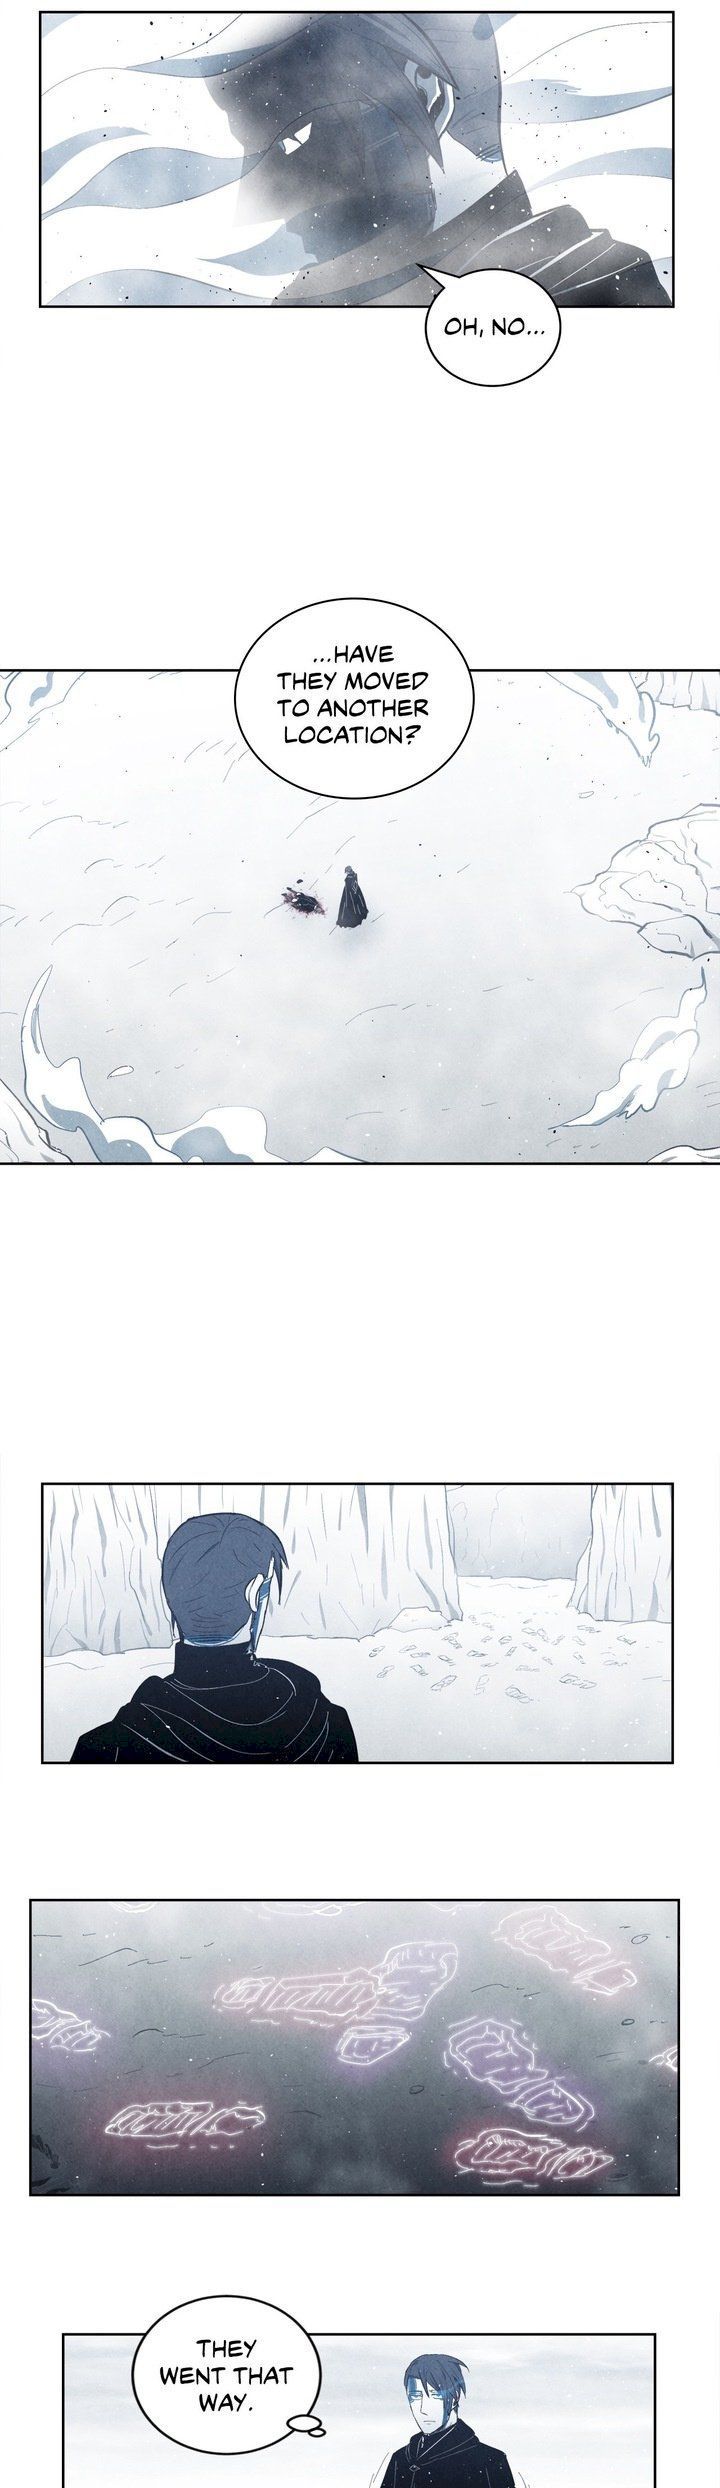 The Ashen Snowfield Chapter 22 page 11